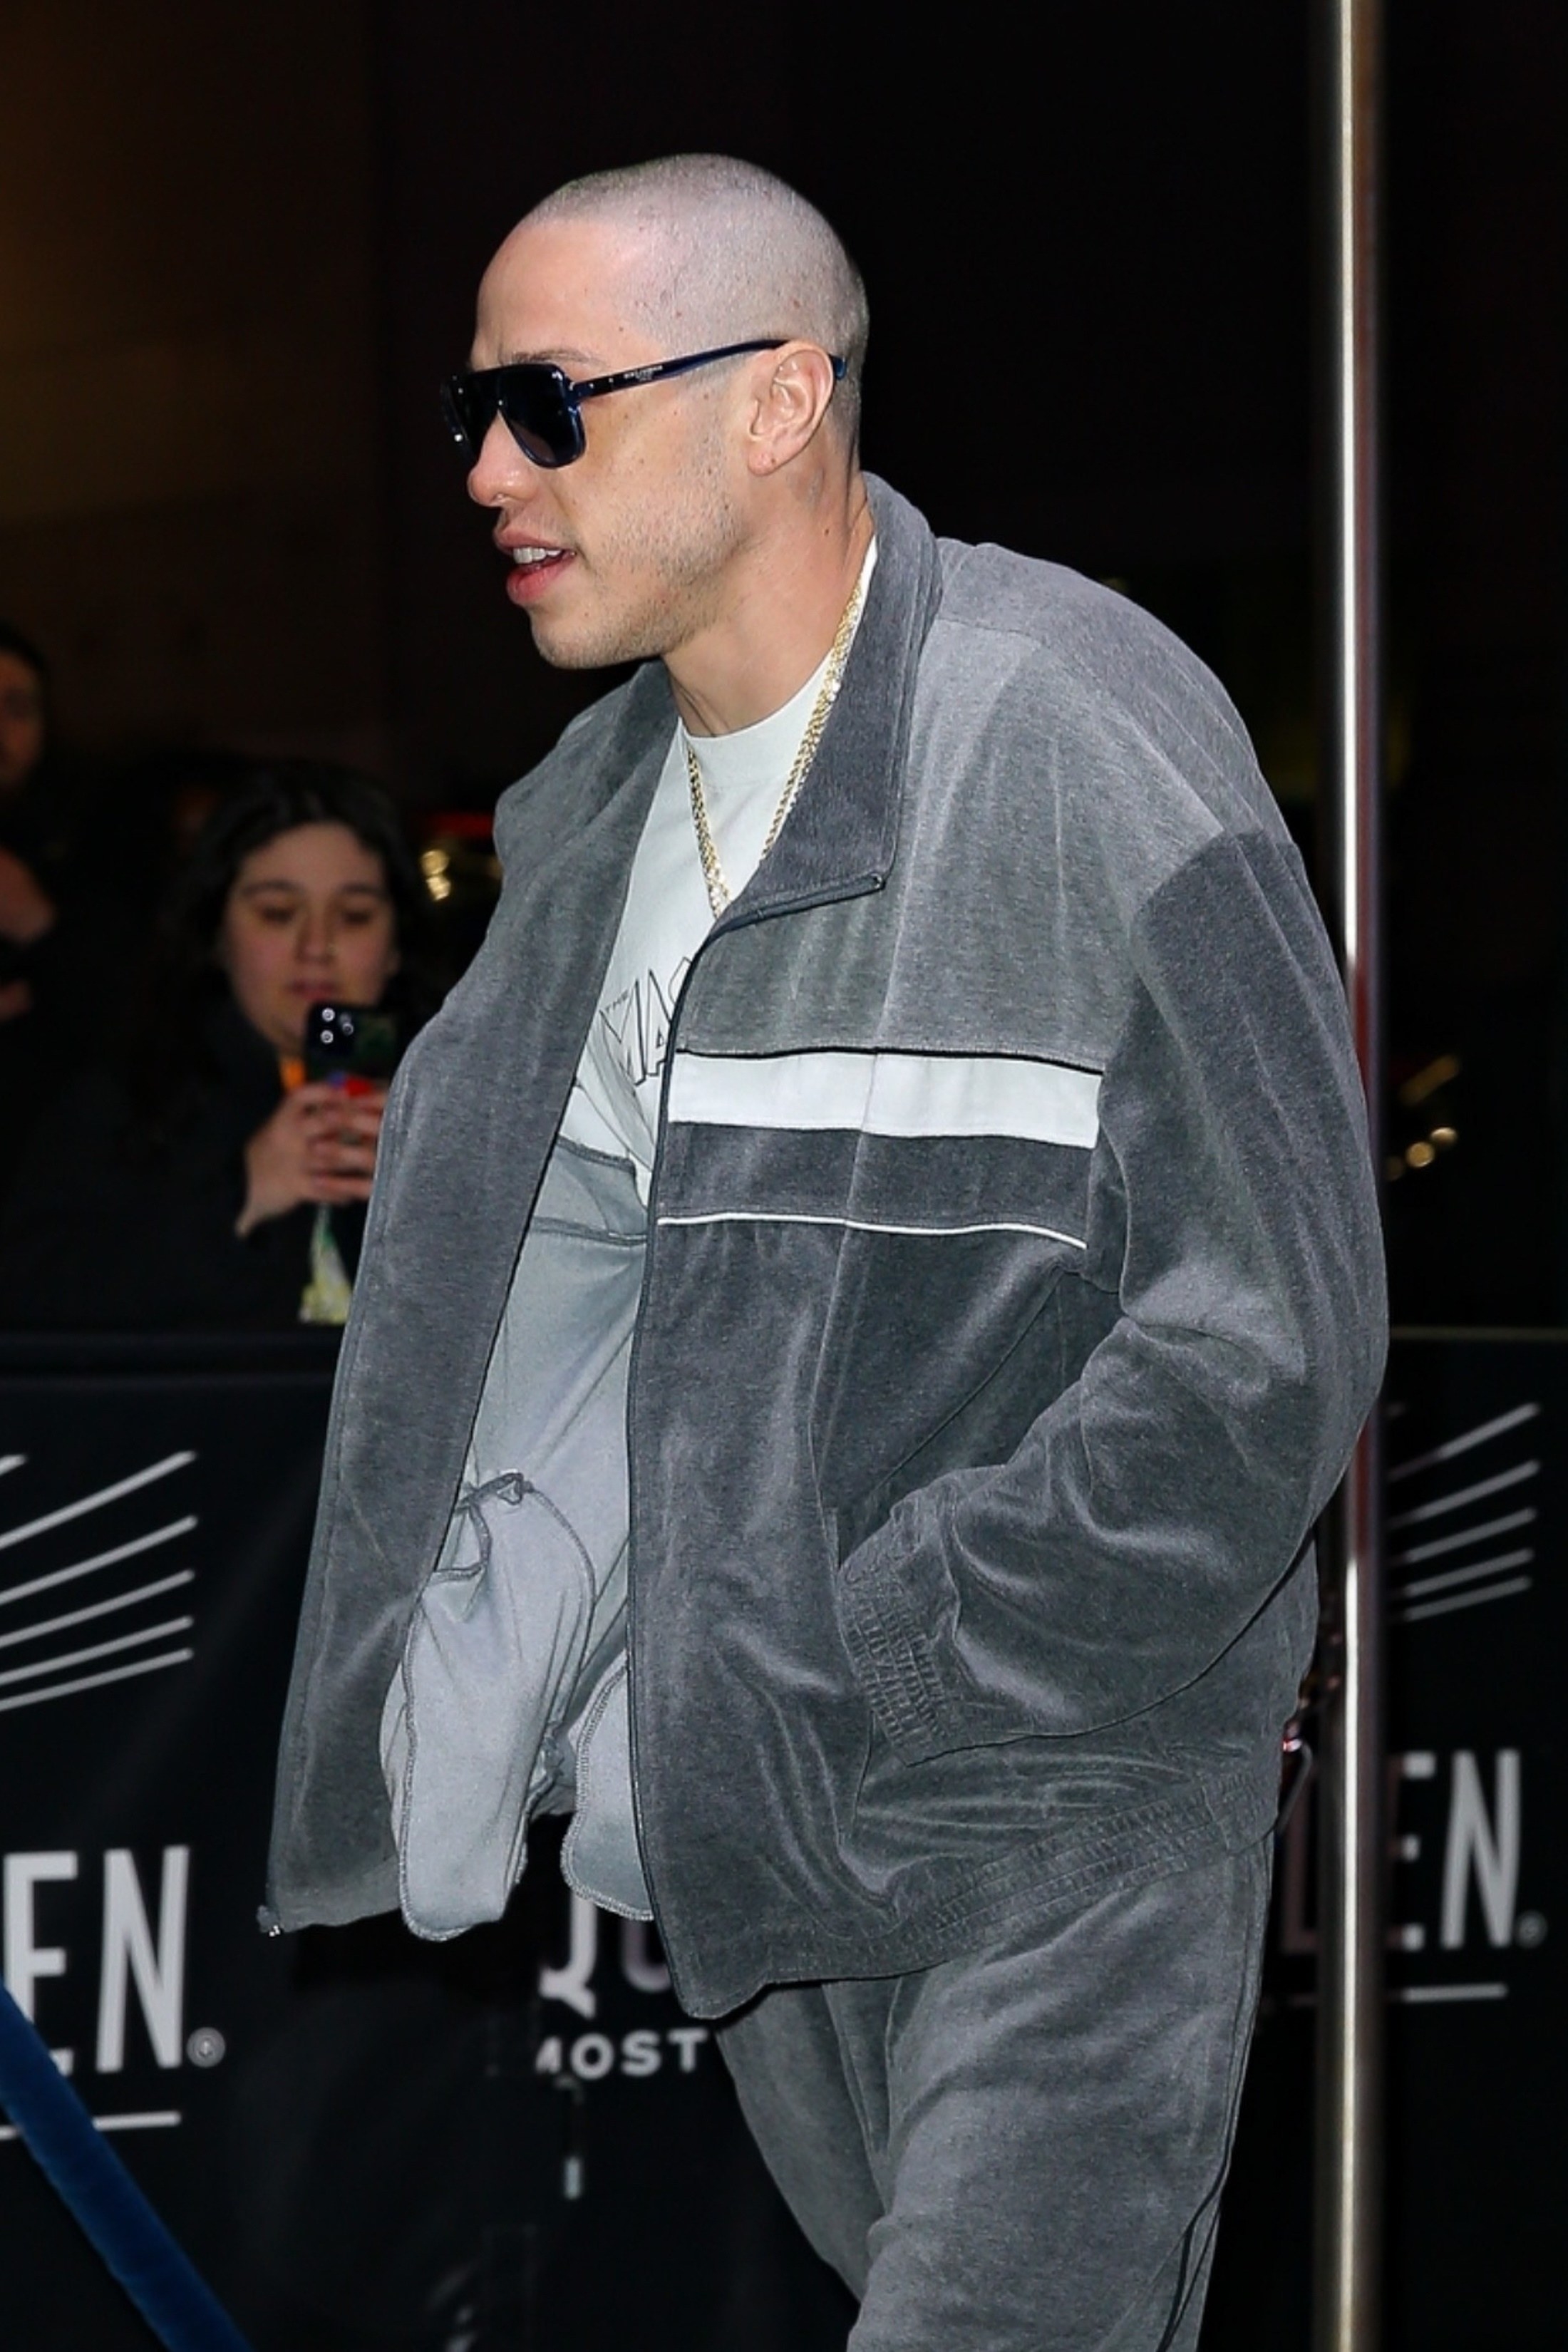 Pete wearing sunglasses as he walks into MSG